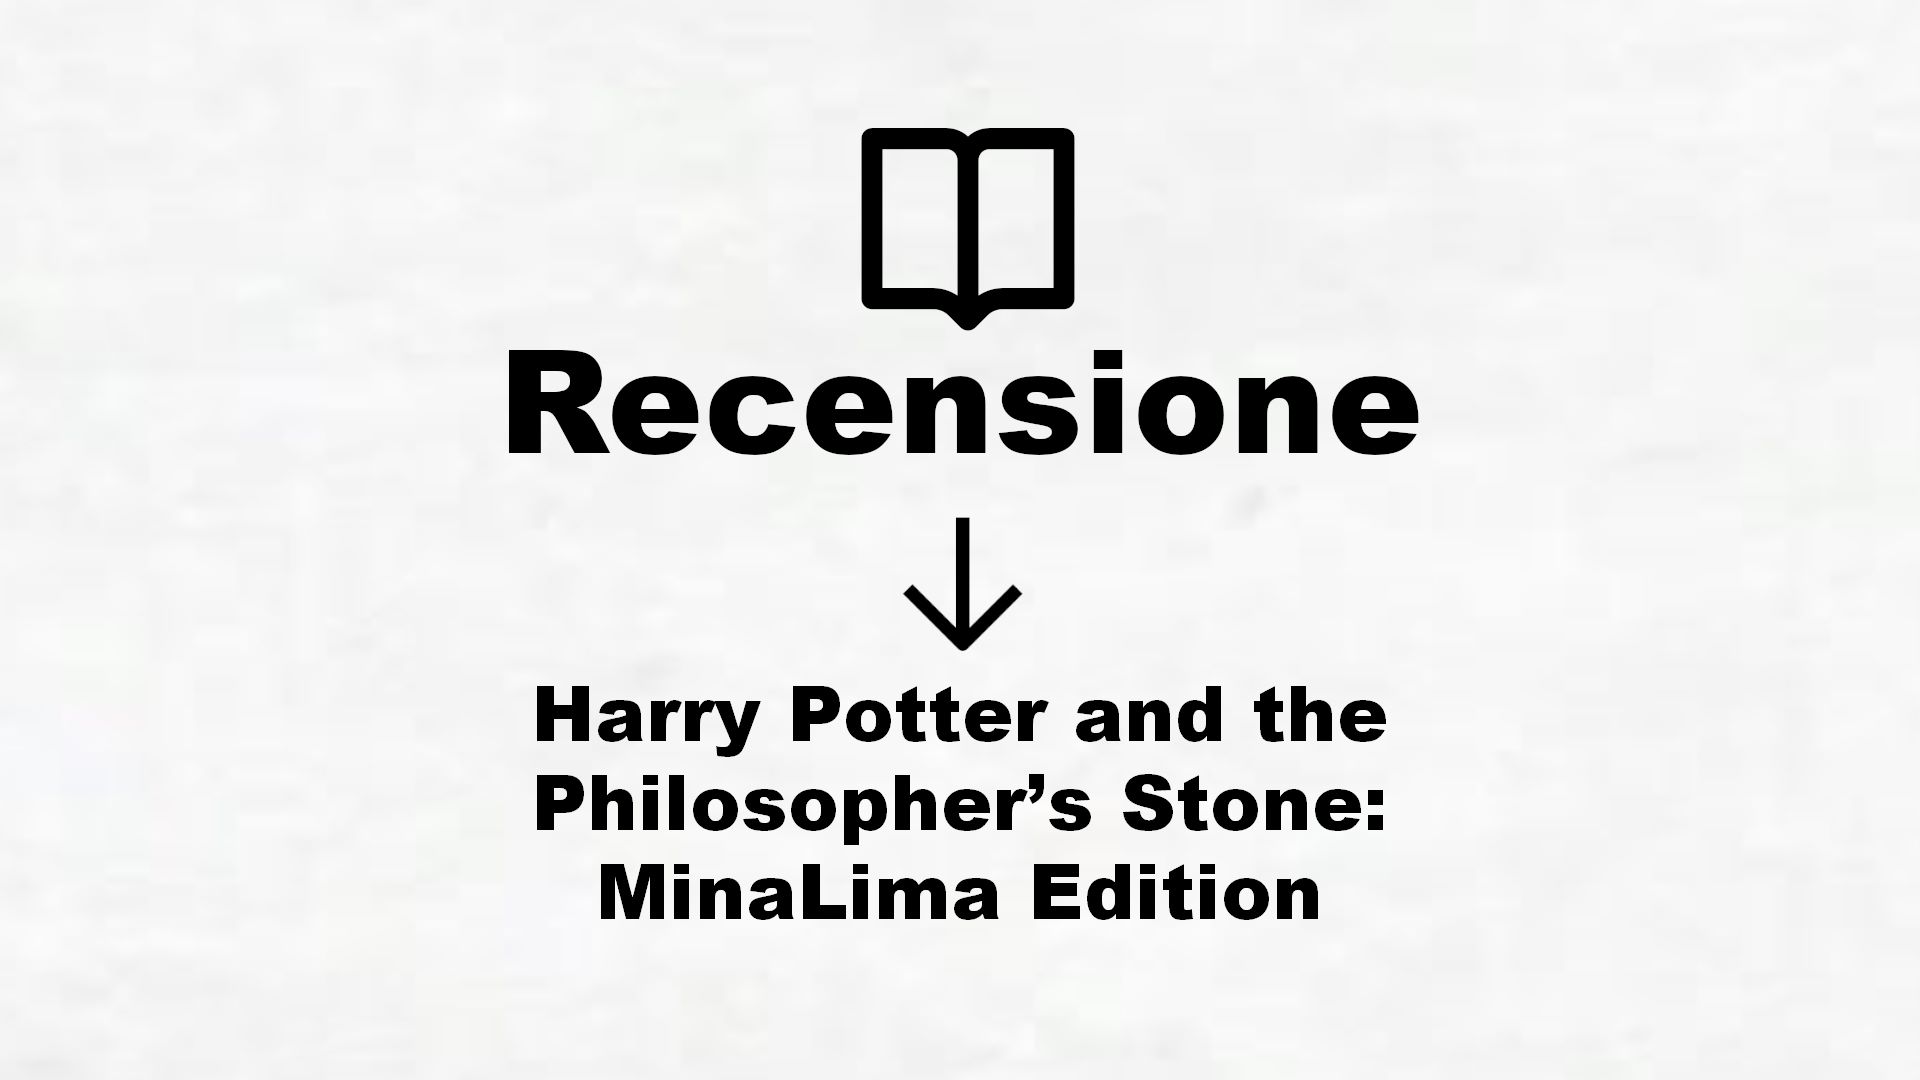 Harry Potter and the Philosopher’s Stone: MinaLima Edition – Recensione Libro